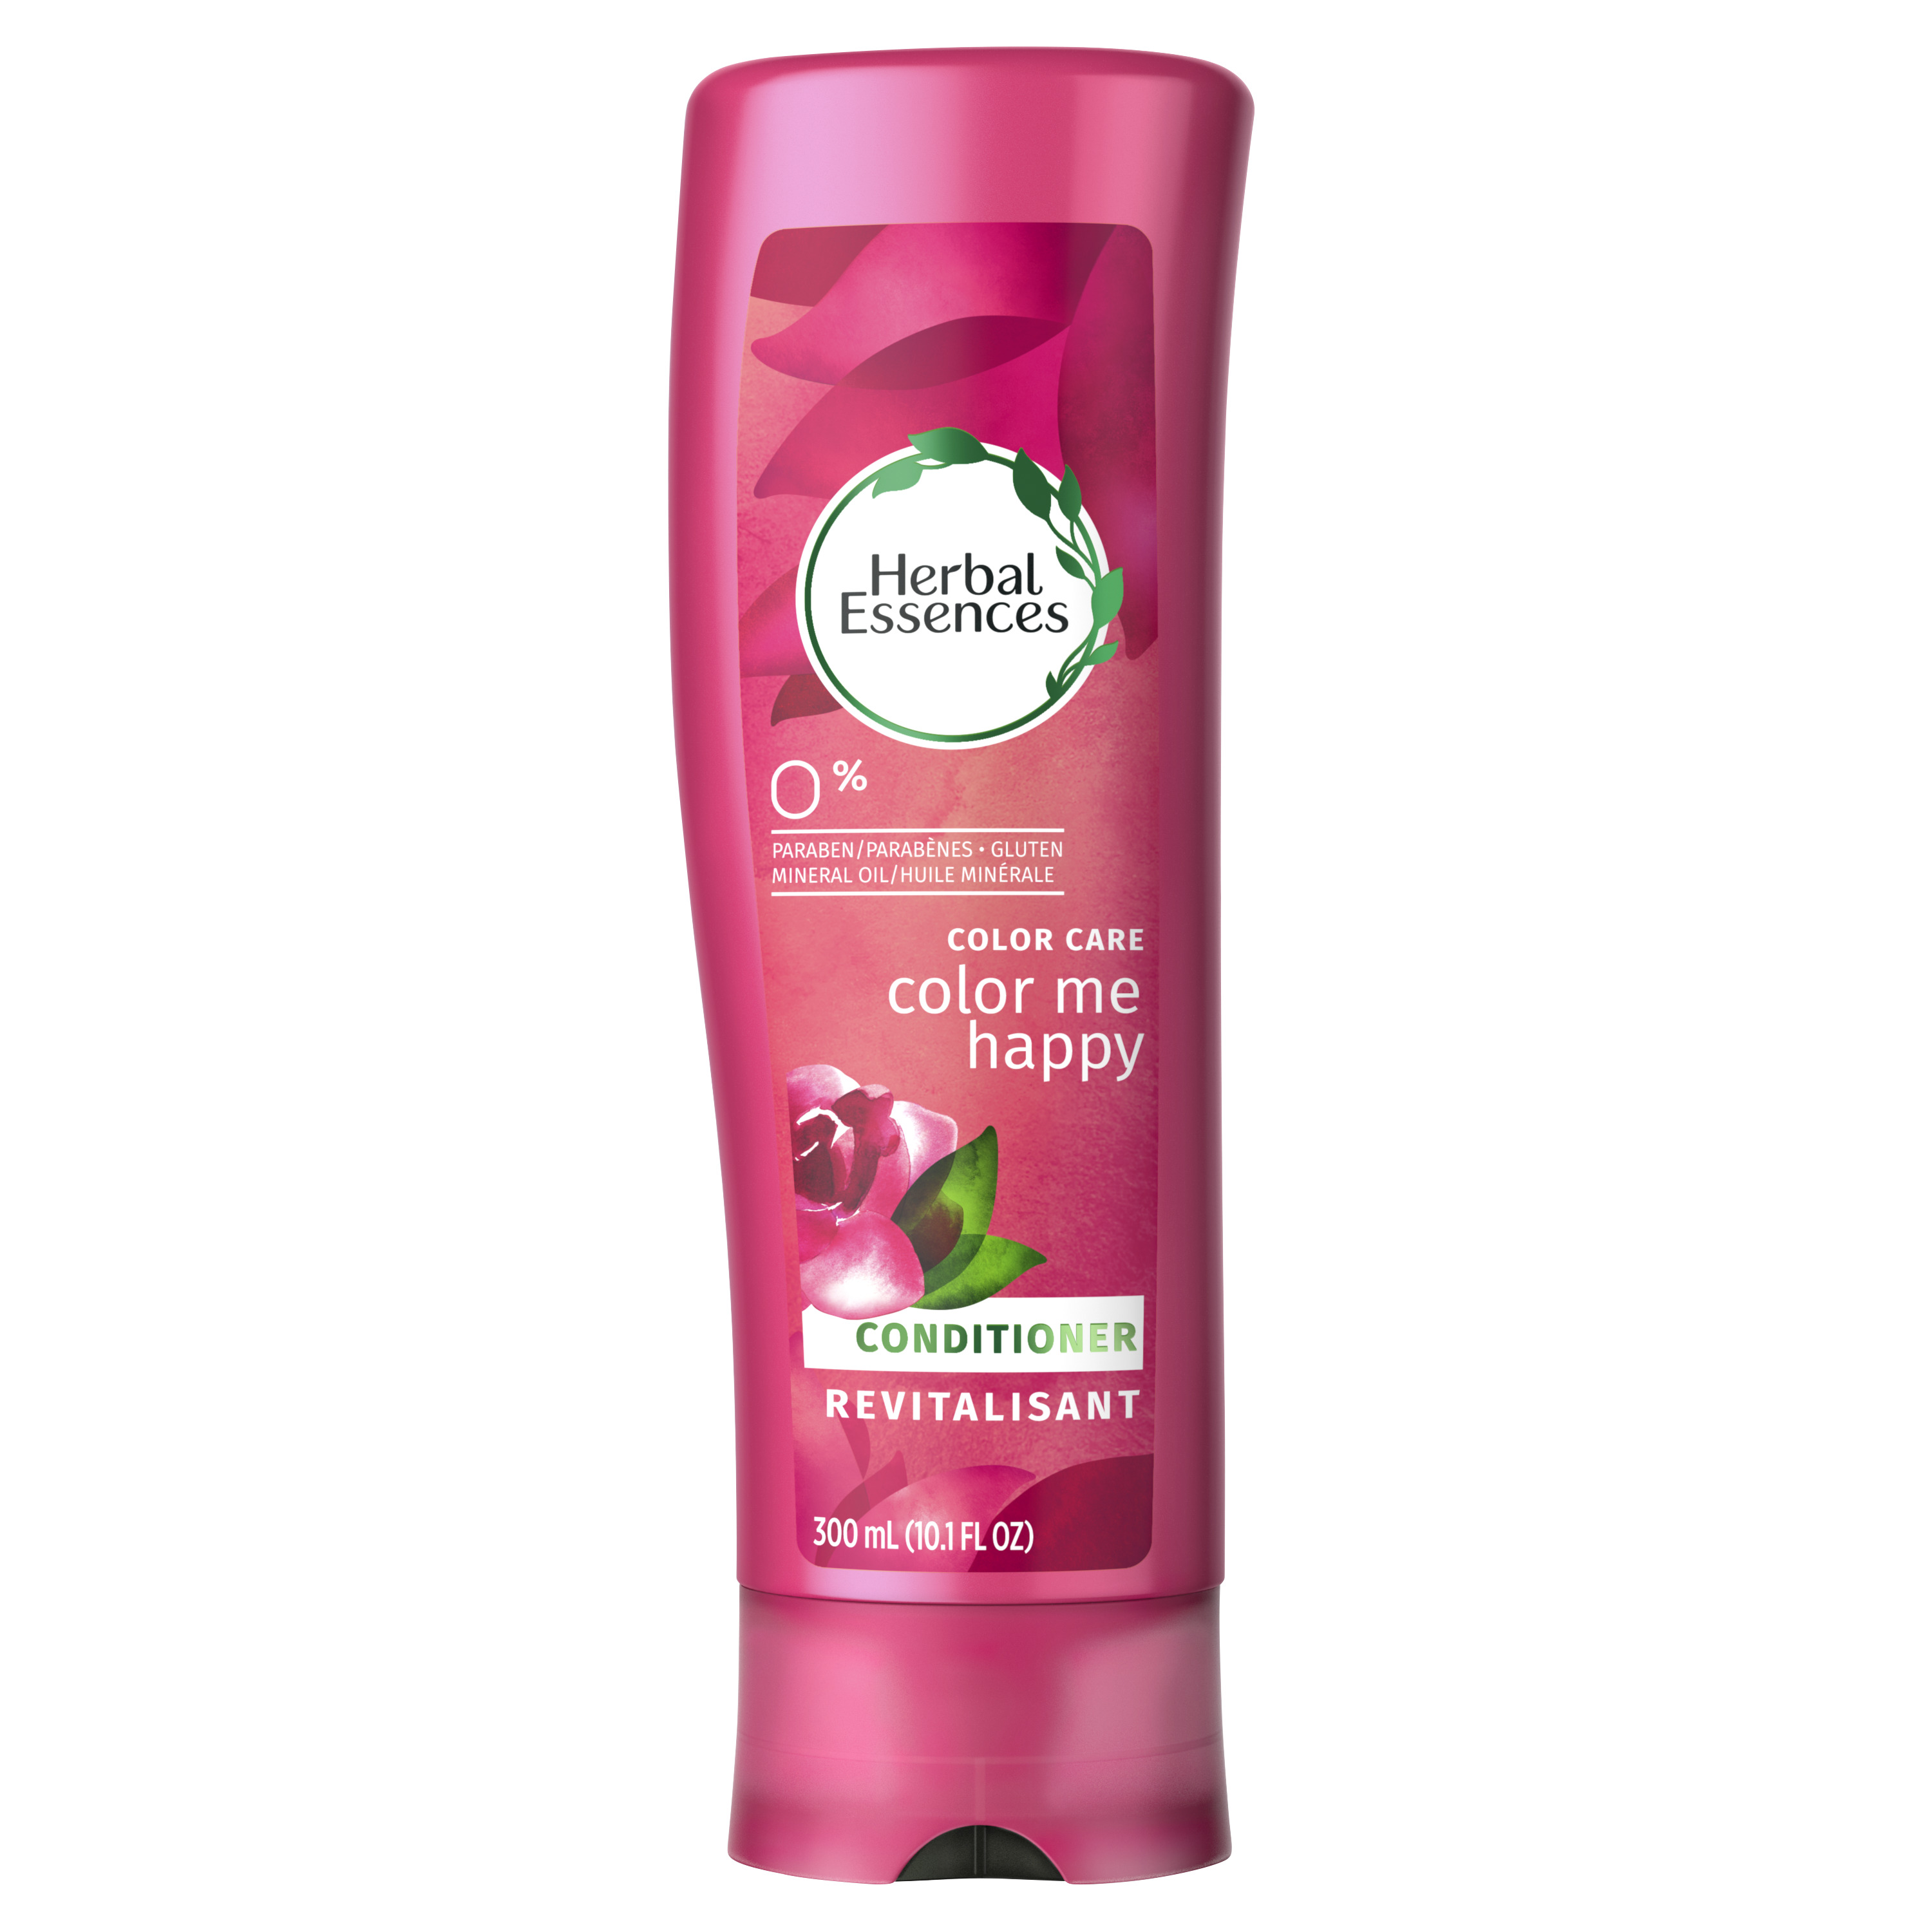 Herbal Essences Color Me Happy Conditioner for Color-Treated Hair, 10.1 fl oz - image 1 of 7